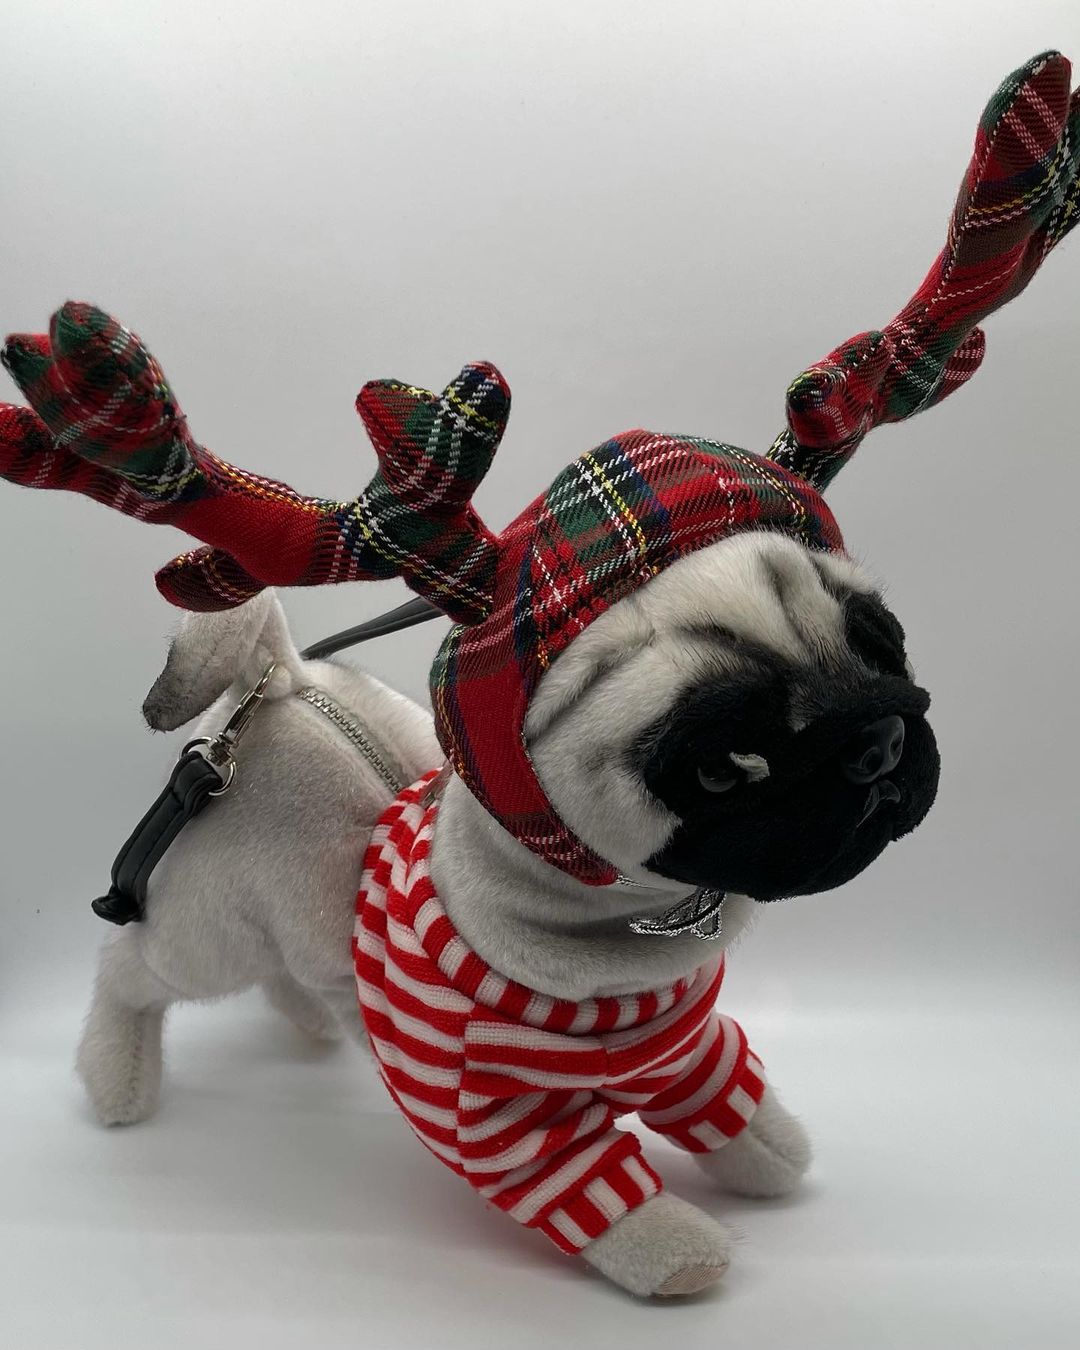 Just added!
This adorable Fuzzy Nation Pugdeer purse is in our mini holiday auction. Link to the Facebook Auction group in our link tree in our bio.
<a target='_blank' href='https://www.instagram.com/explore/tags/pugsofinstagram/'>#pugsofinstagram</a> <a target='_blank' href='https://www.instagram.com/explore/tags/hoildayauction/'>#hoildayauction</a> <a target='_blank' href='https://www.instagram.com/explore/tags/fuzzynation/'>#fuzzynation</a> <a target='_blank' href='https://www.instagram.com/explore/tags/pugpurse/'>#pugpurse</a>